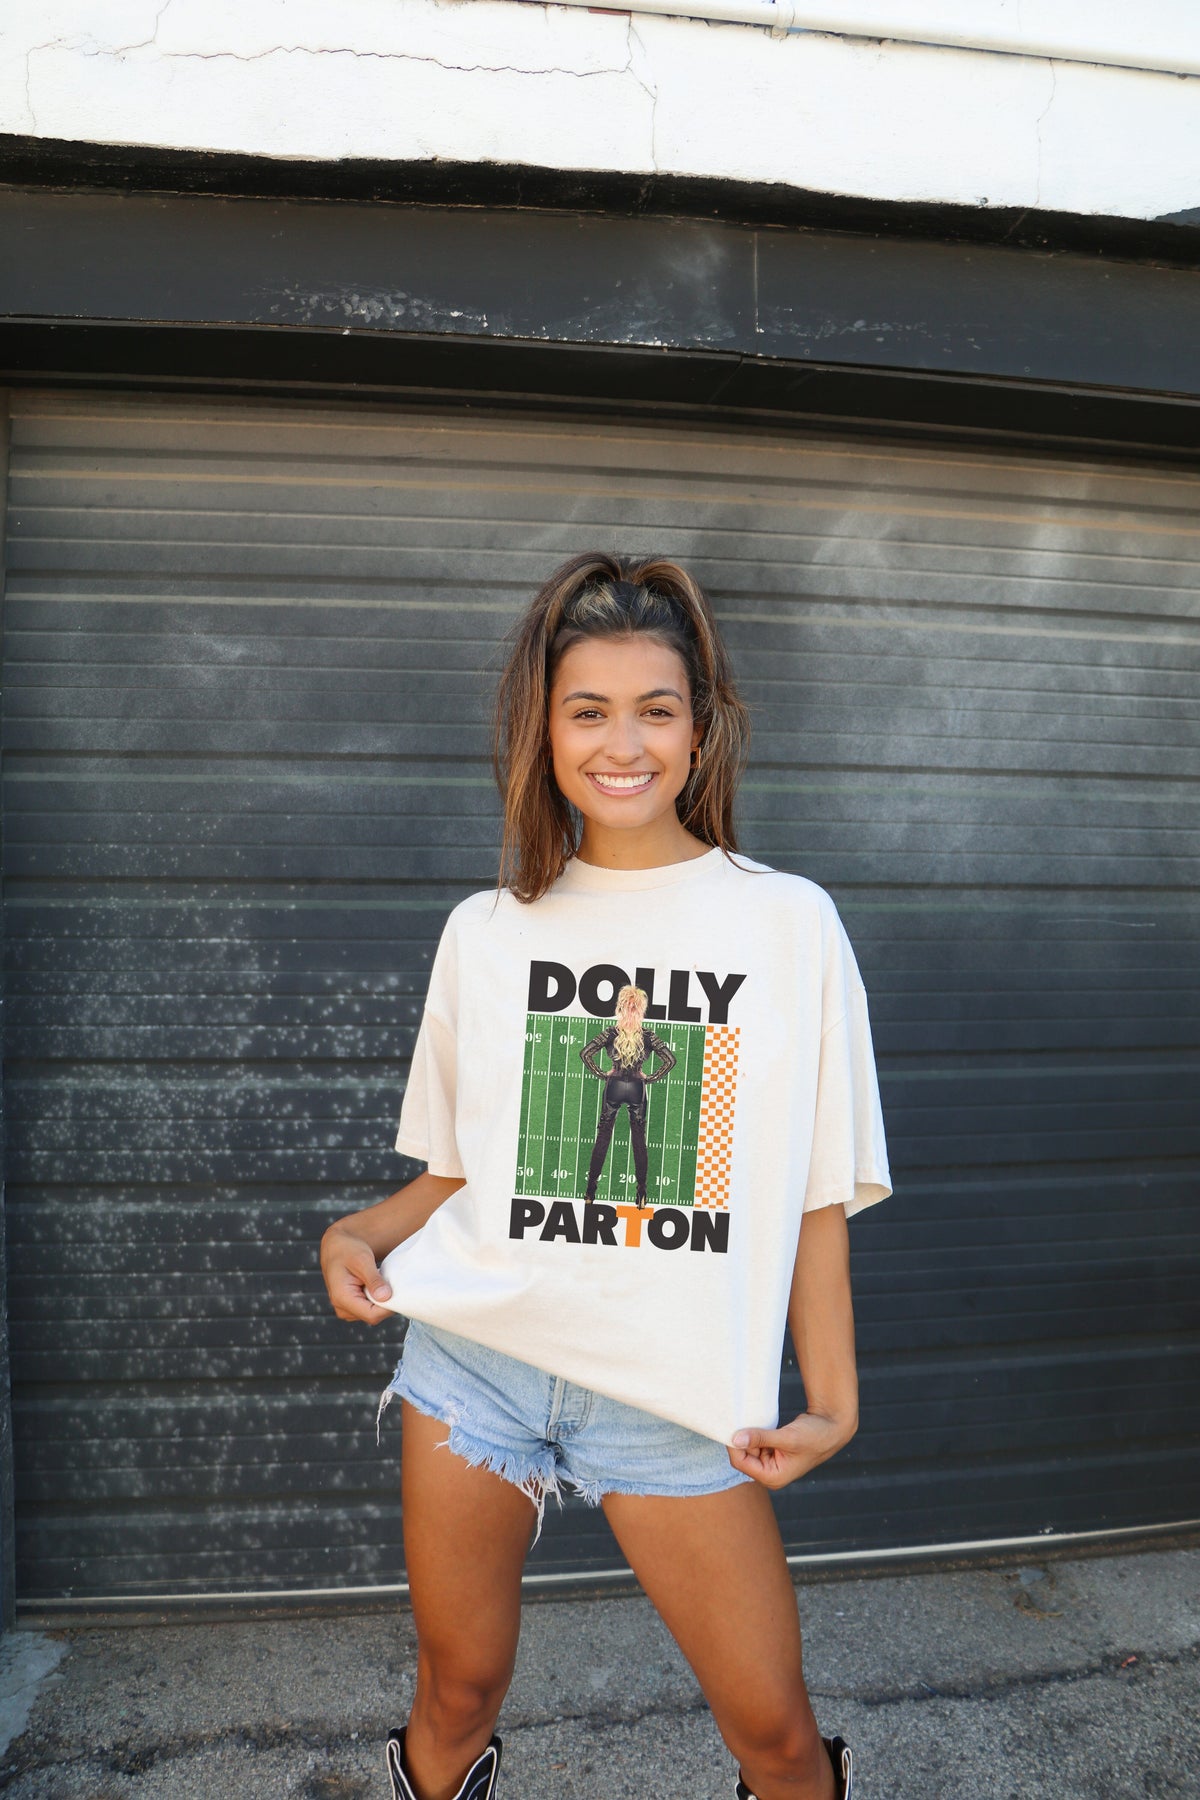 Dolly Parton Rockstar Vols Check Field Off White Thrifted Distressed Tee